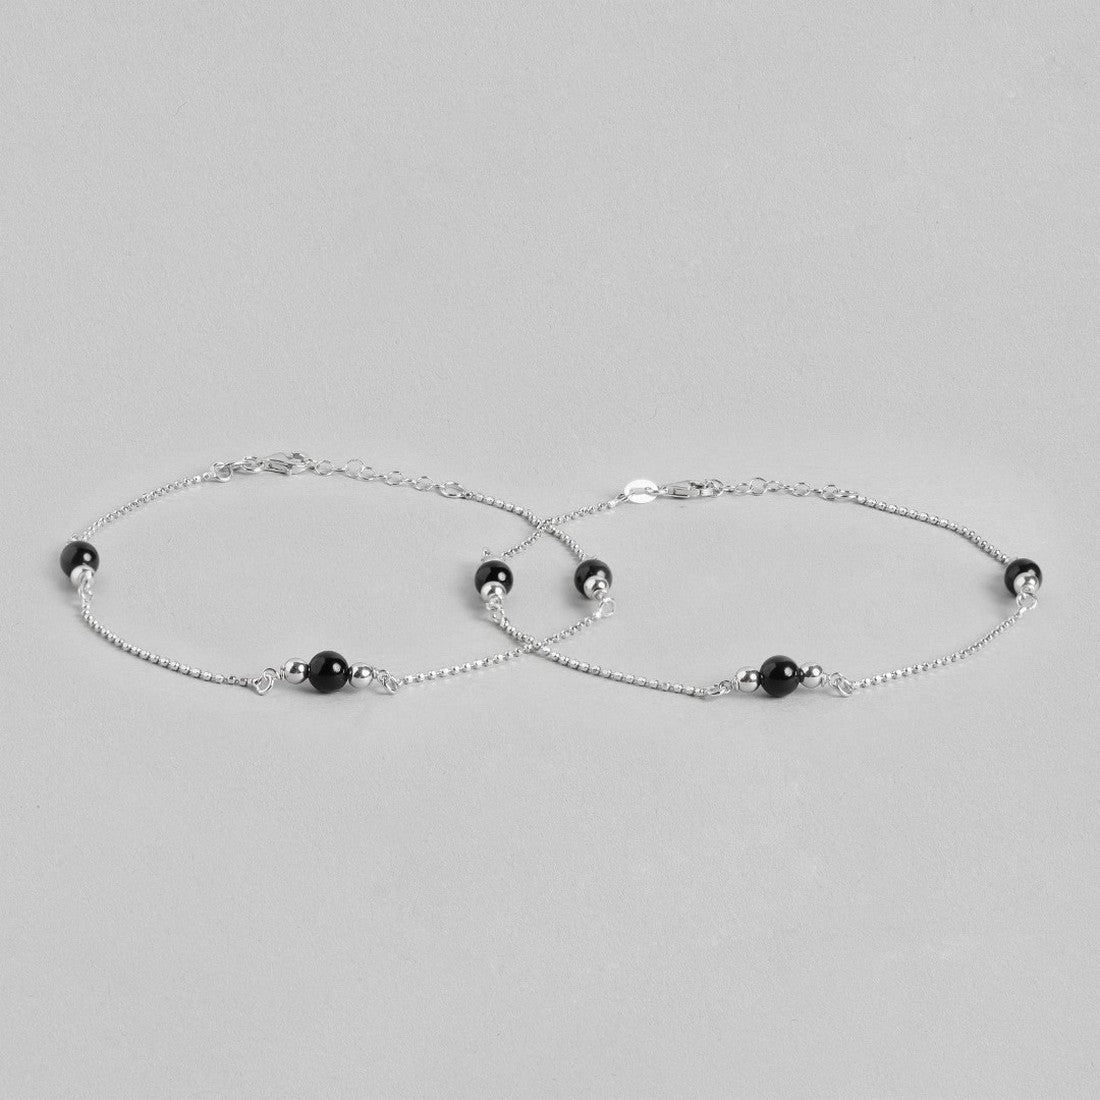 Black Pearl Rhodium Plated 925 Sterling Silver Chained Anklet